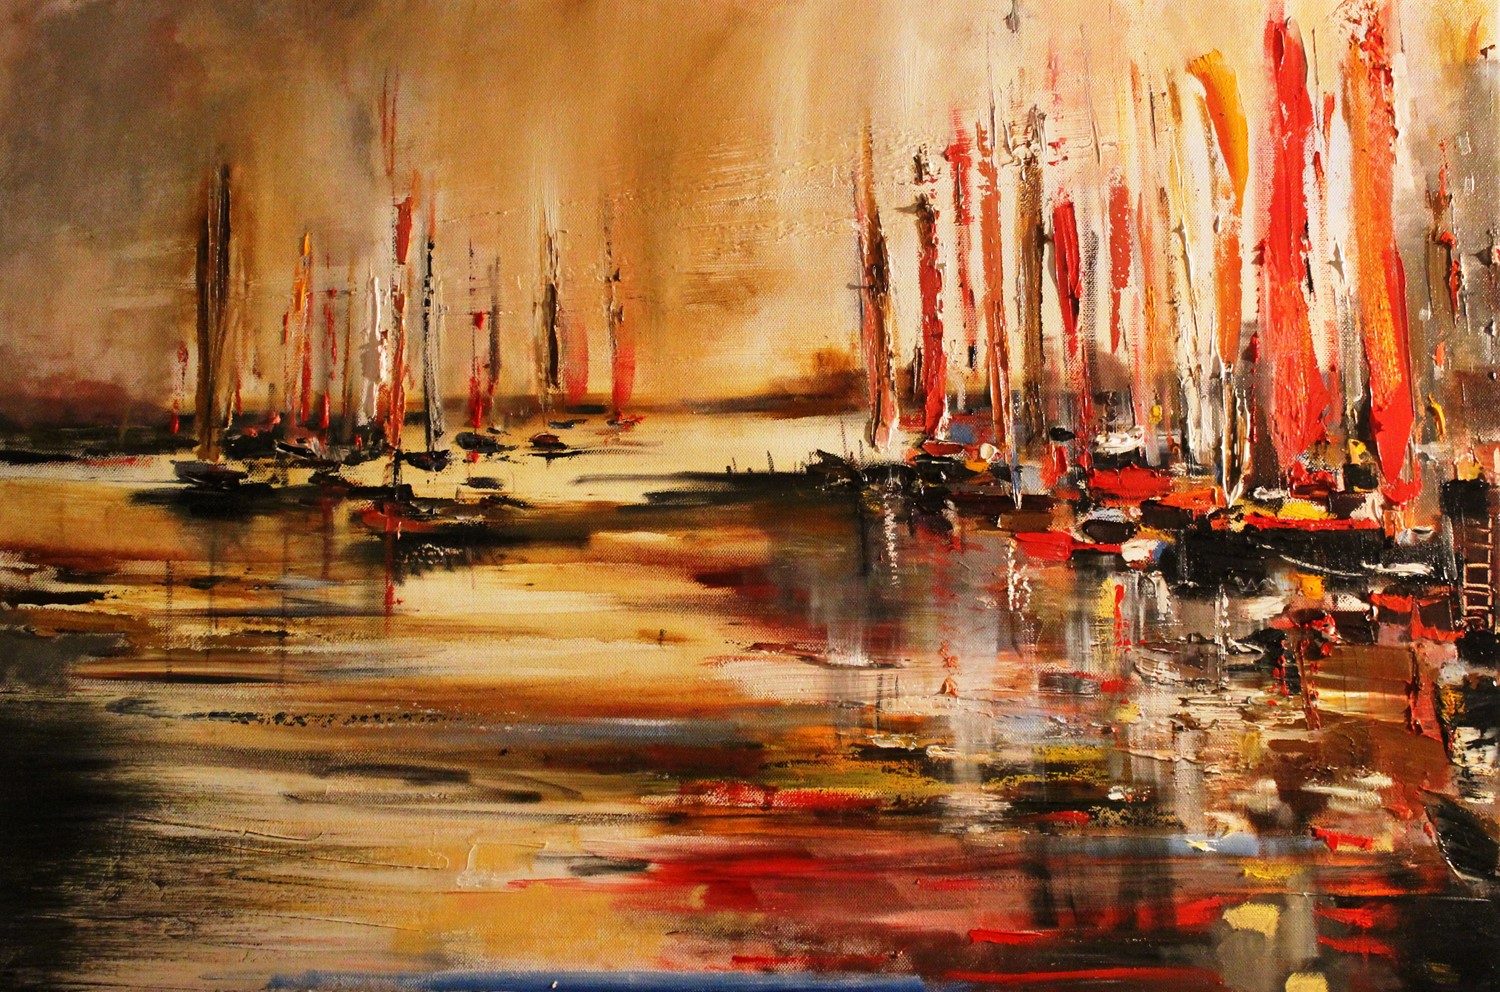 'A Cluttered Harbour' by artist Rosanne Barr